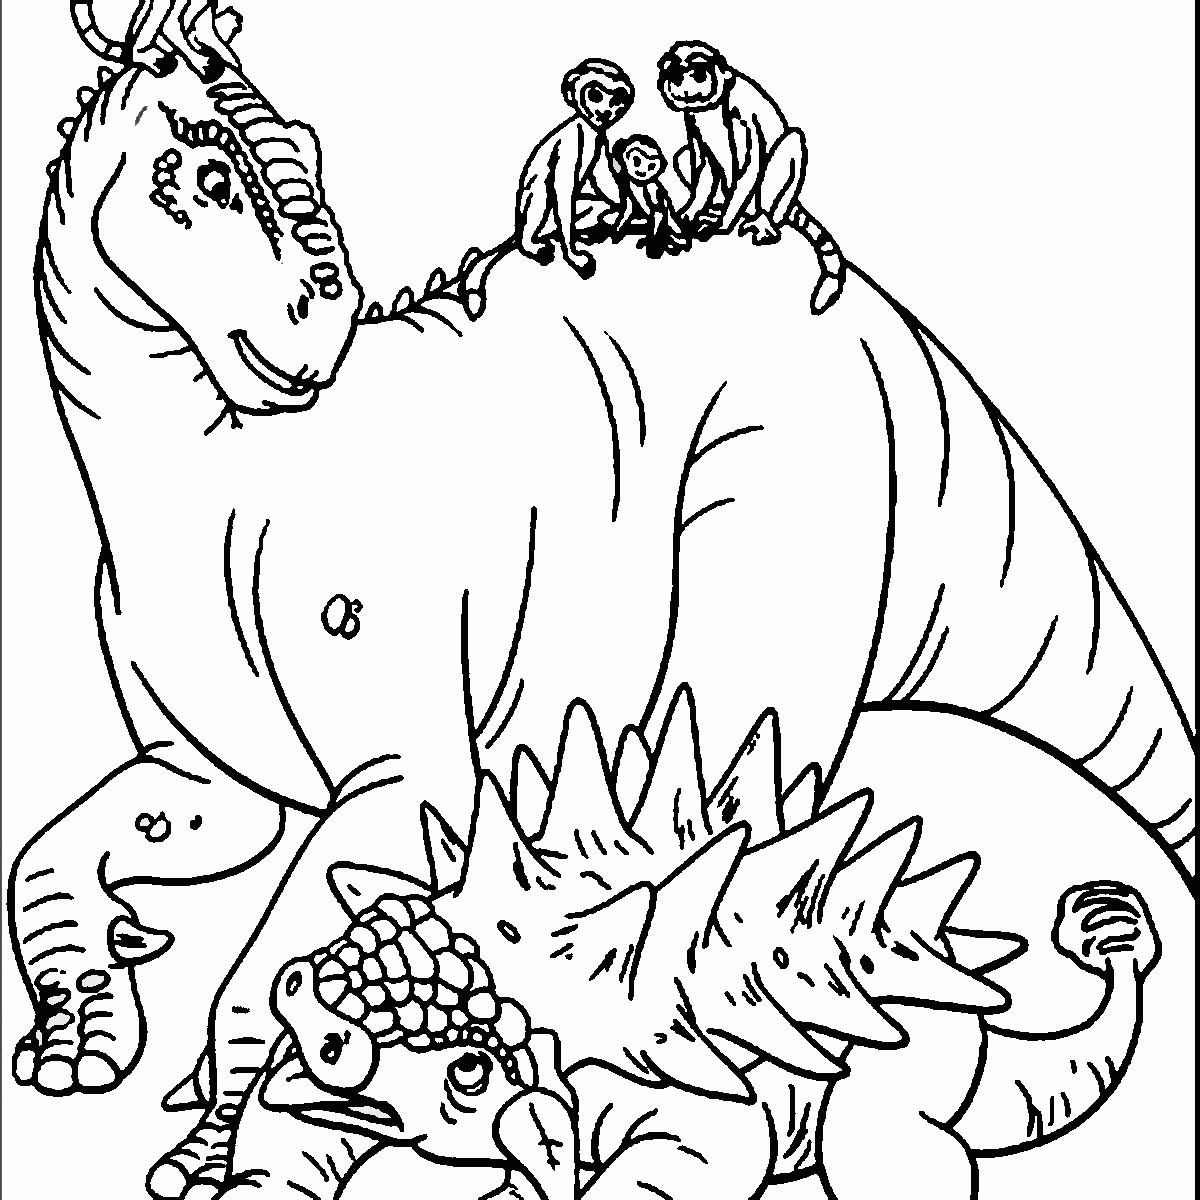 6 Pics of Jurassic World Coloring Pages - Jurassic Park 3 Coloring ...